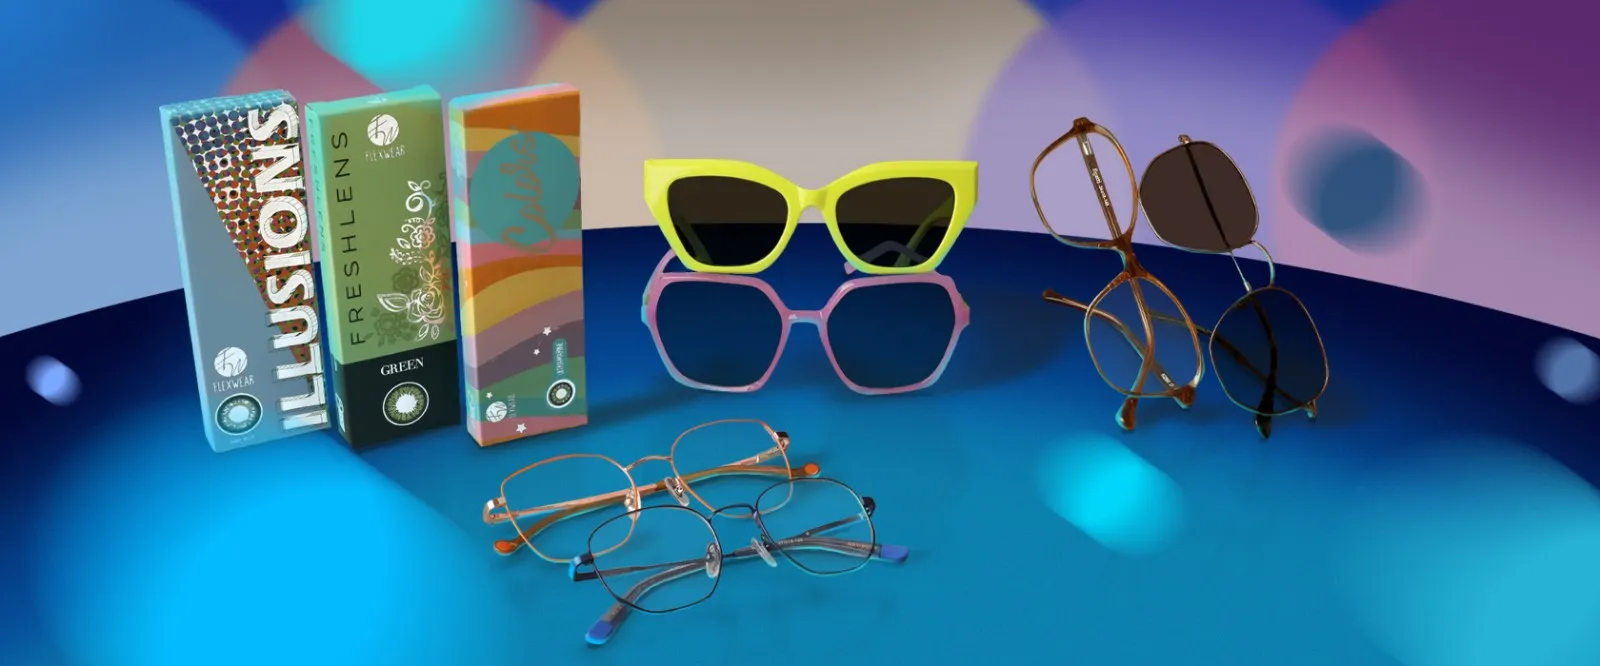 A group photo of sunglasses, eyeglasses, and contact lenses